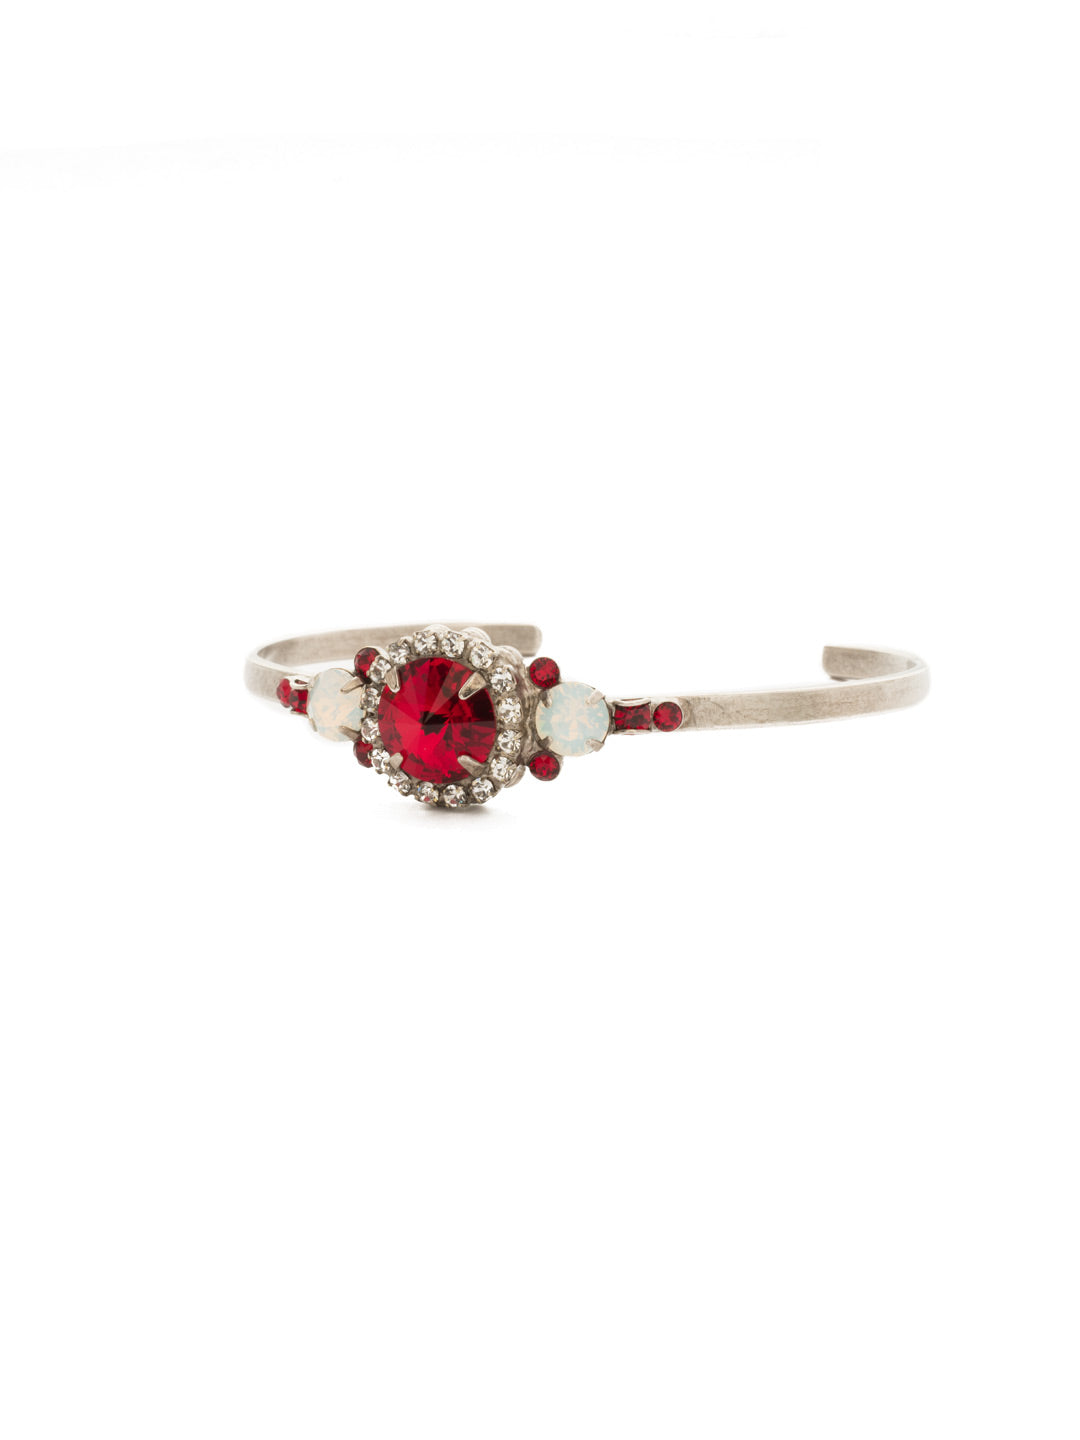 Embellished Rivoli Bracelet - BDU44ASCP - <p>A central round rivoli cut crystal is encircled with delicate rhinestones and embellished with petite circular stones. From Sorrelli's Crimson Pride collection in our Antique Silver-tone finish.</p>